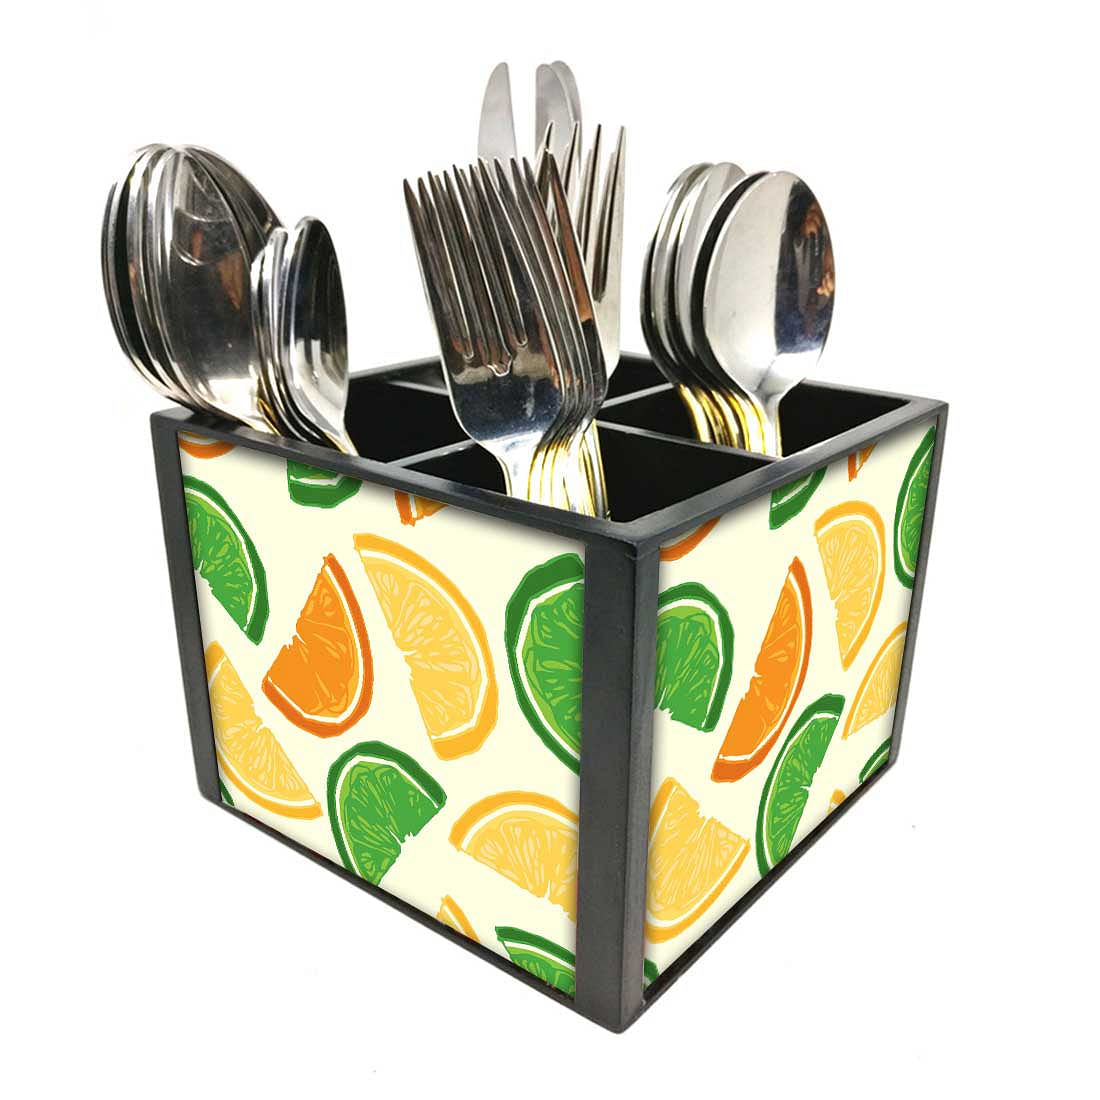 Sweet Limes Cutlery Holder Stand Silverware Caddy Organizer for Spoons, Forks & Knives-Made of Pinewood Nutcase